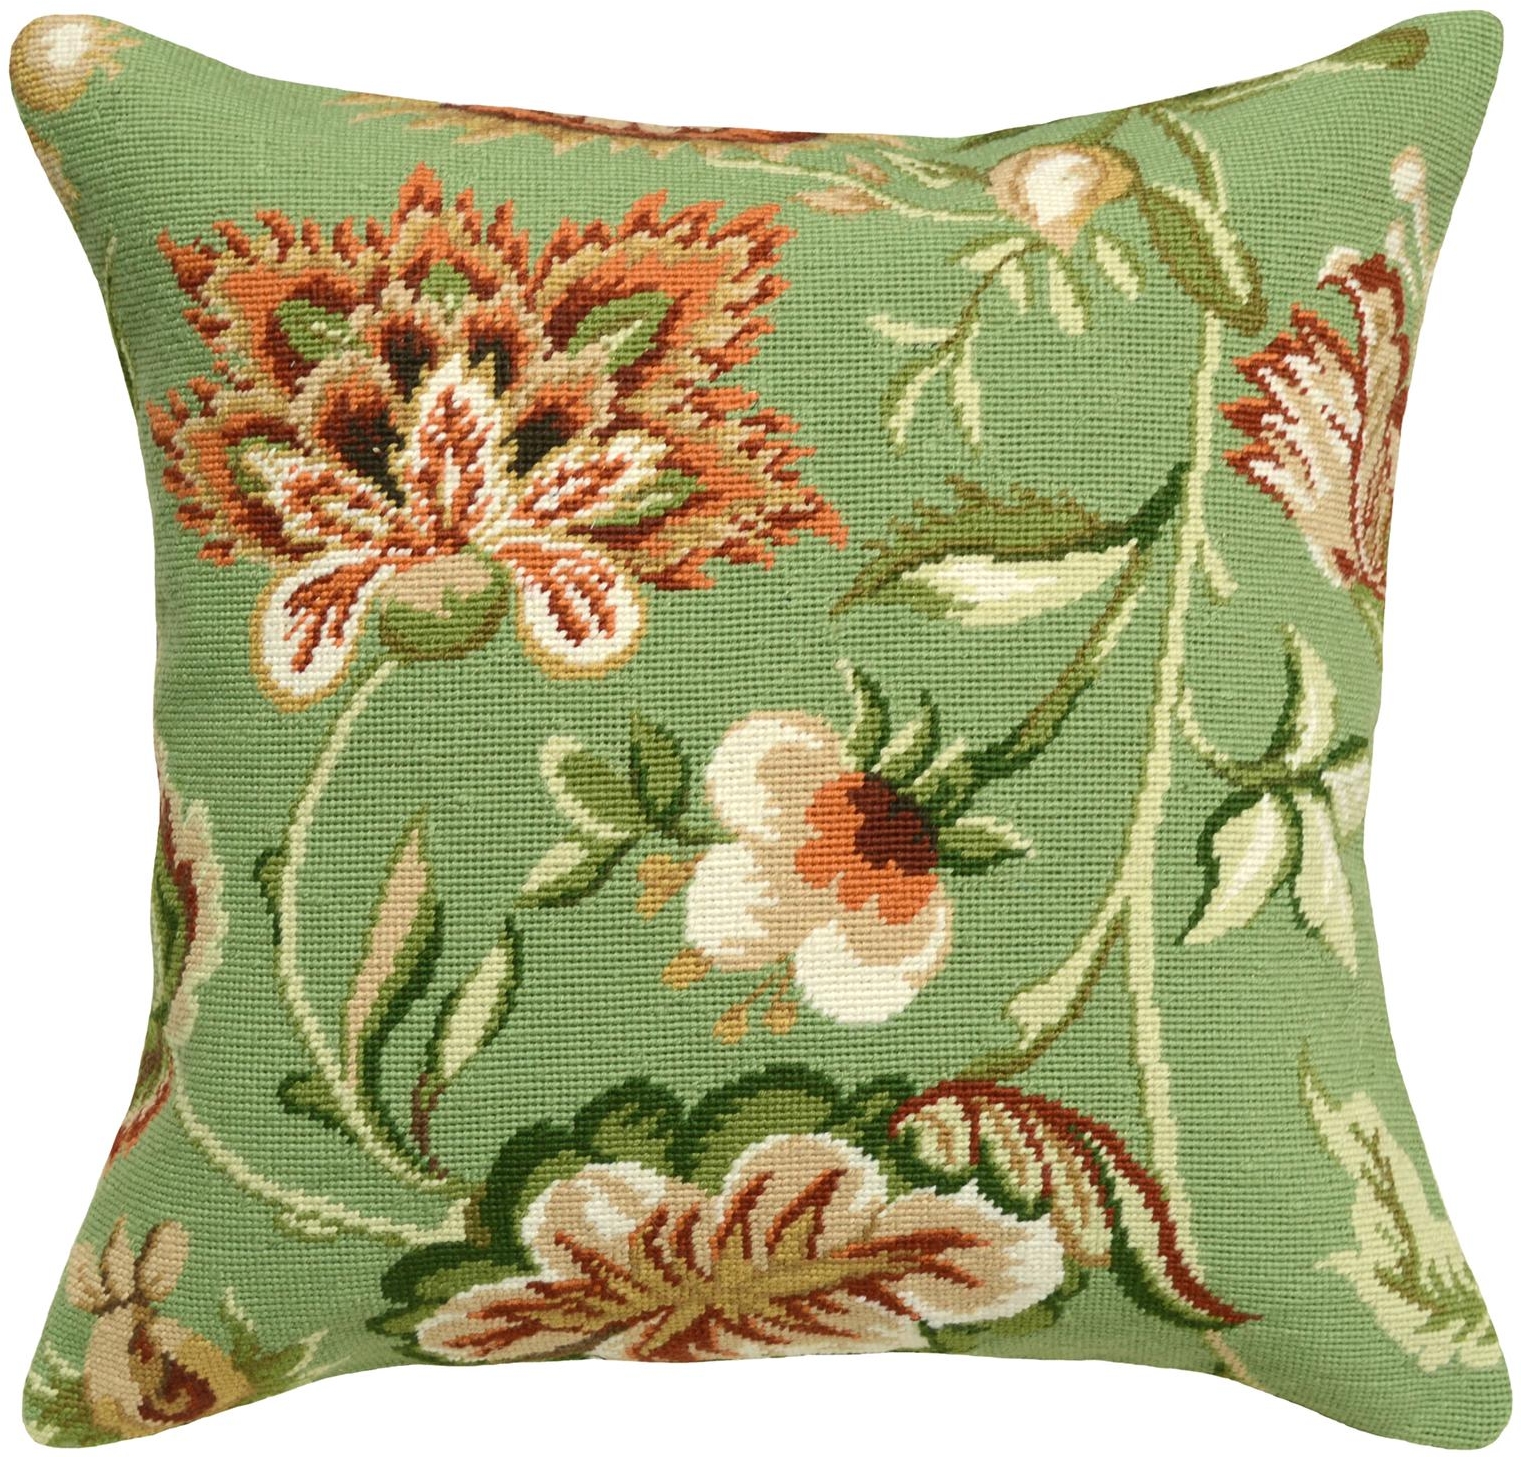 Throw Pillow Jacobean Floral Flowers 20x20 Green Wool Yarn Poly Rayon Insert-Image 2